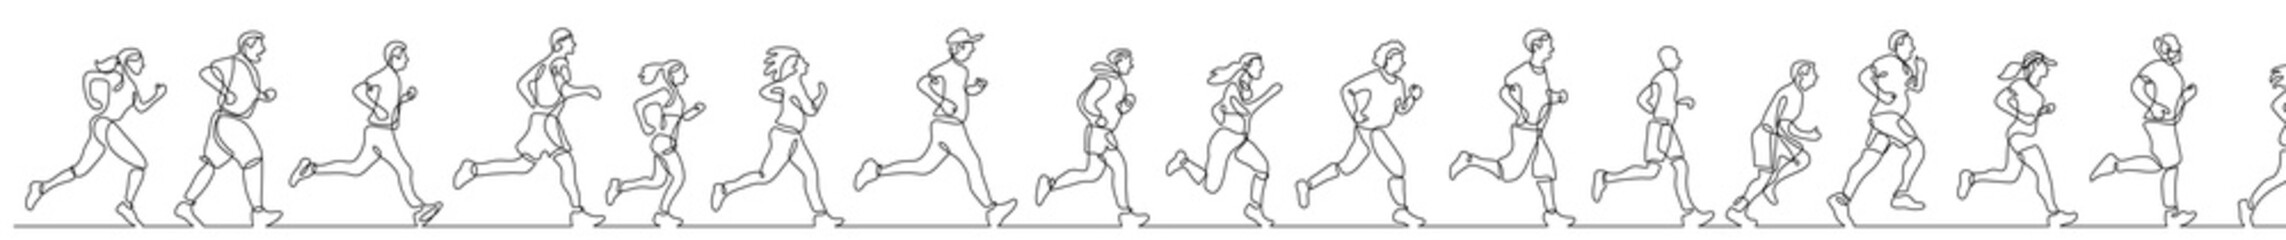 continuous line drawing vector illustration with FULLY EDITABLE STROKE of group of diverse people running jogging